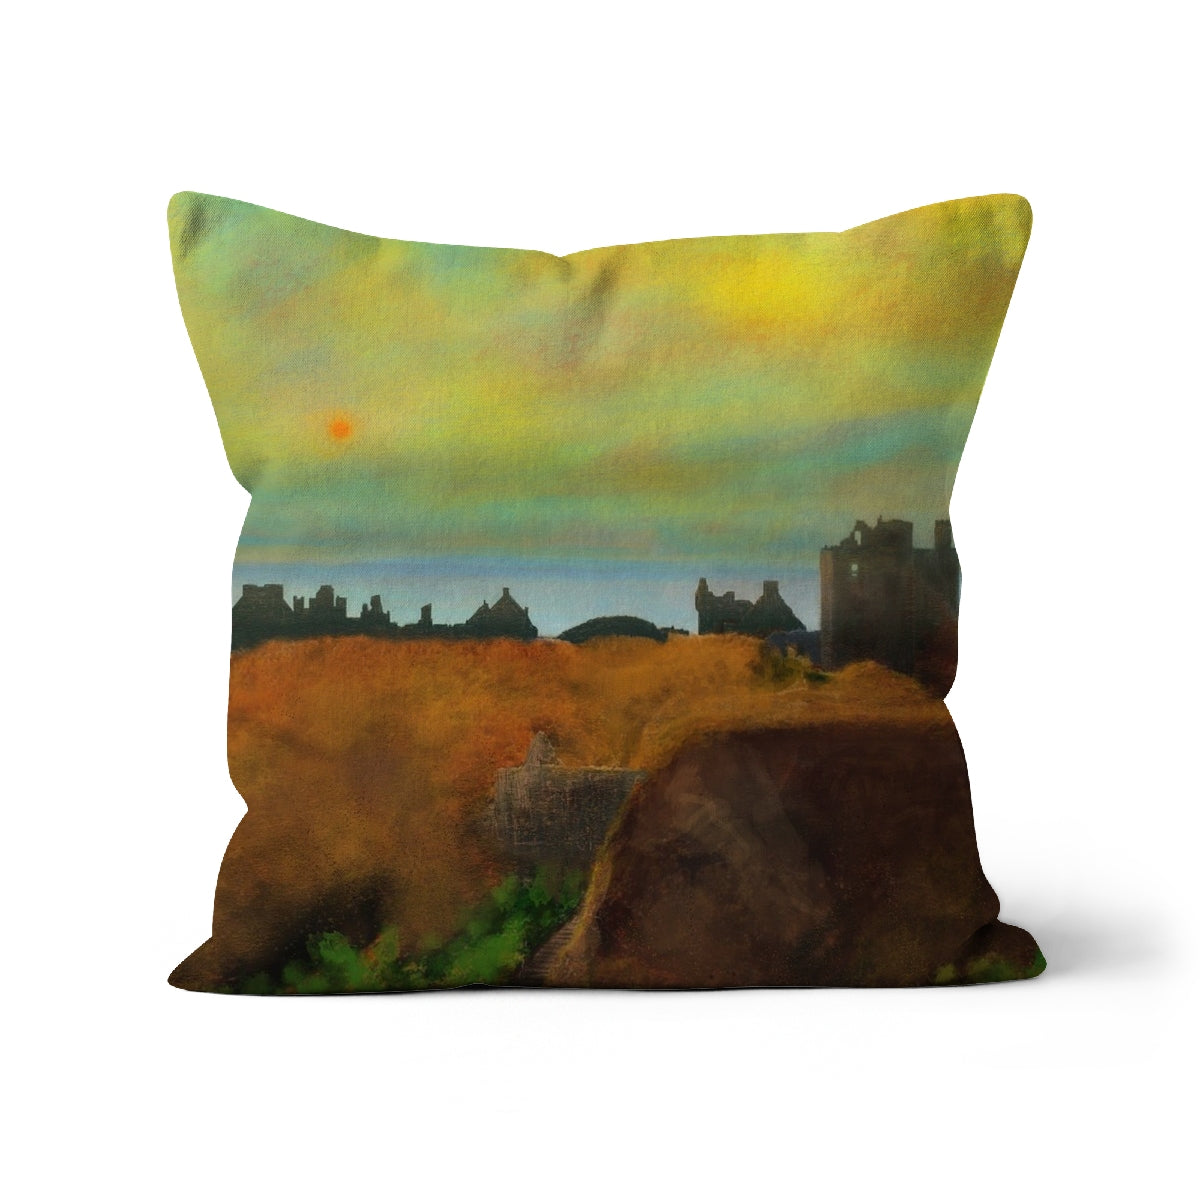 Dunnottar Castle Art Gifts Cushion-Cushions-Historic & Iconic Scotland Art Gallery-Faux Suede-16"x16"-Paintings, Prints, Homeware, Art Gifts From Scotland By Scottish Artist Kevin Hunter